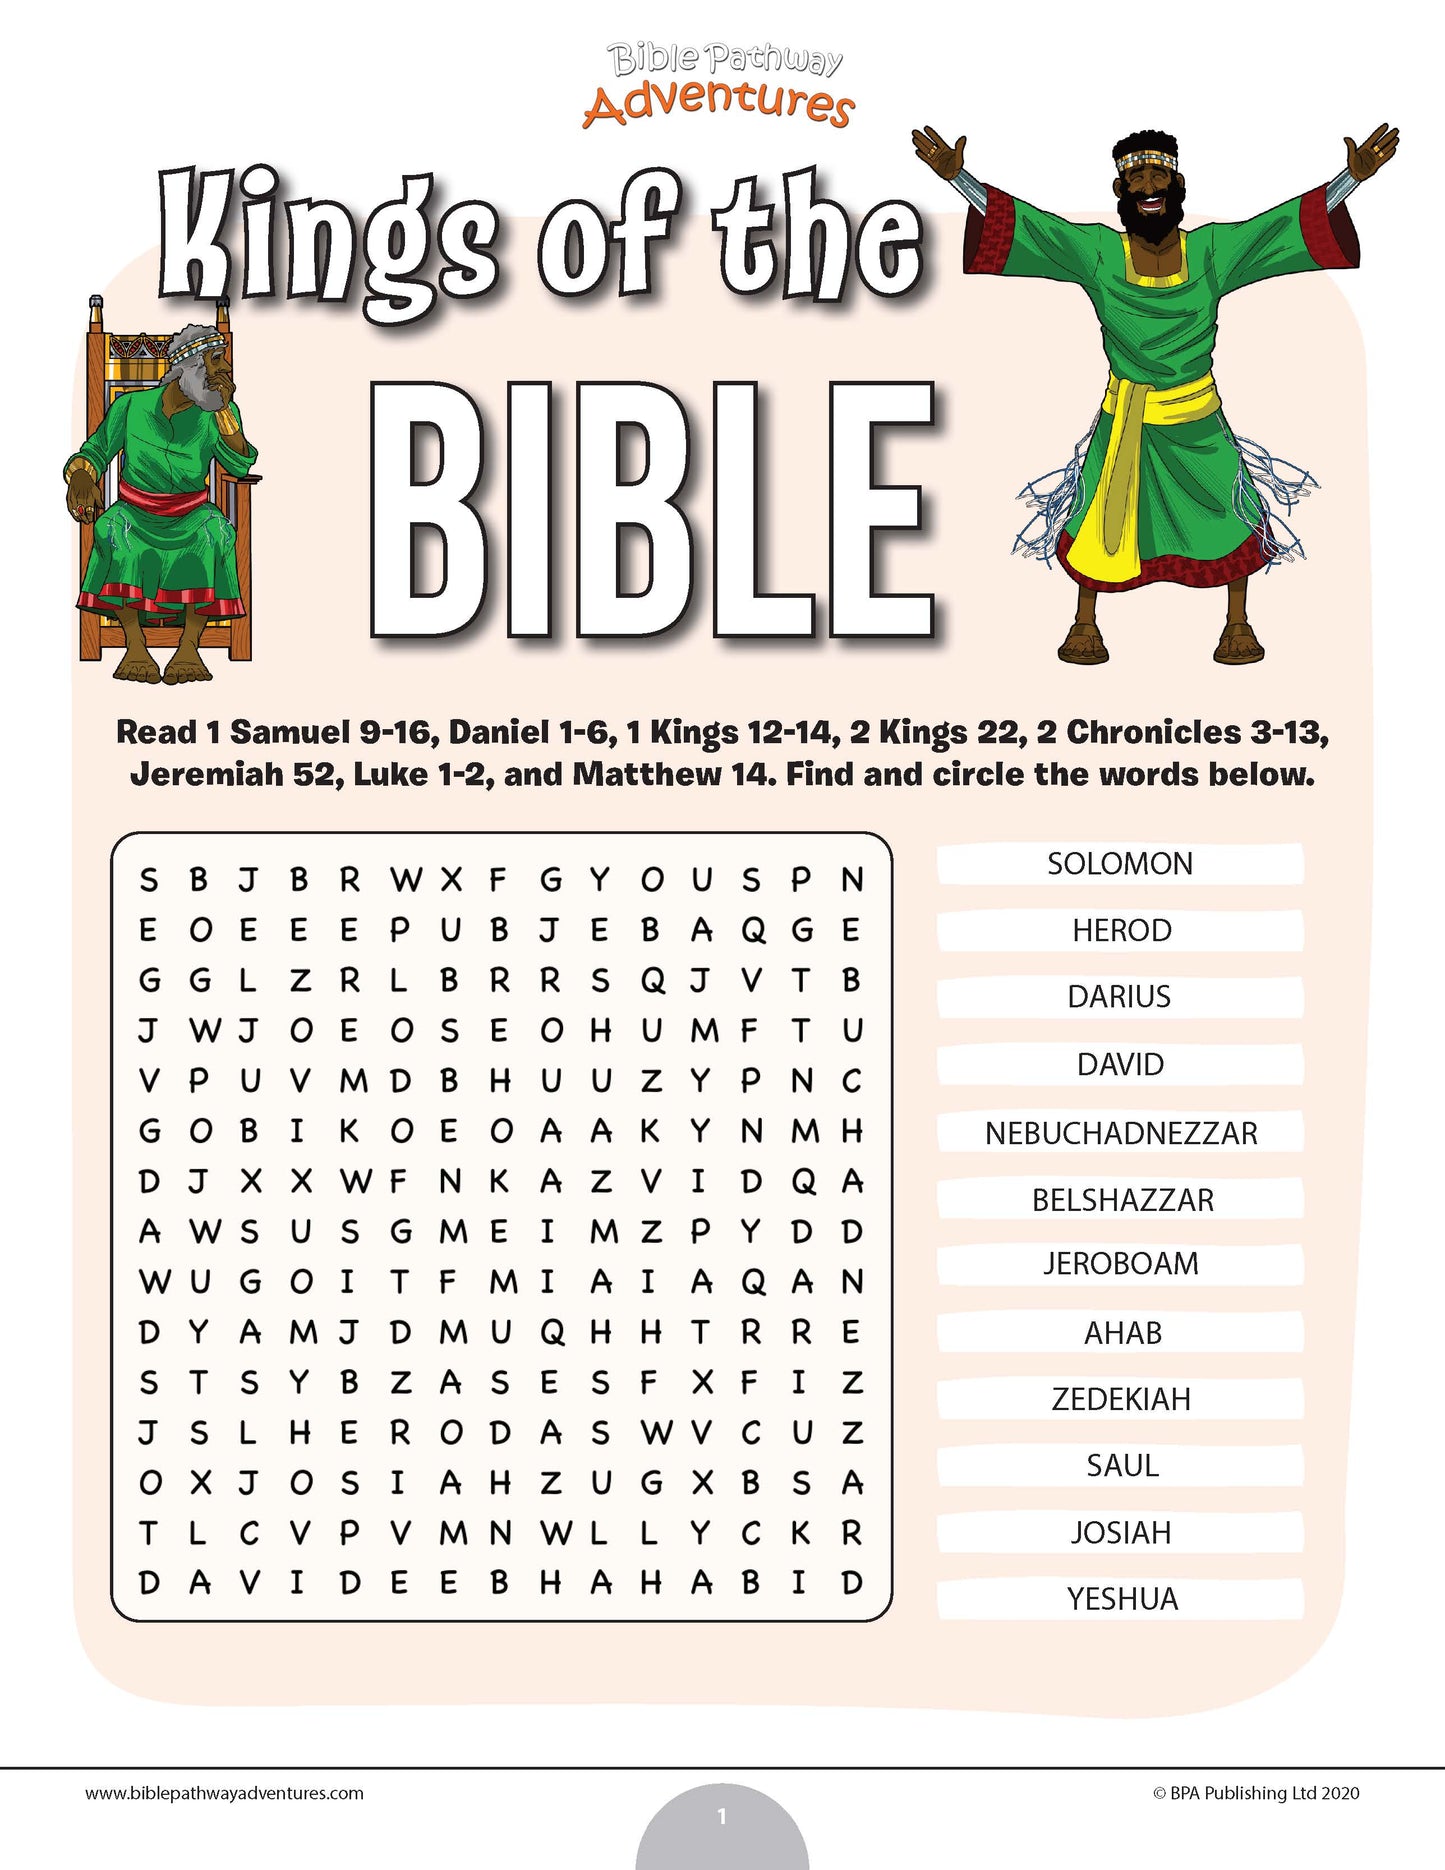 Kings of the Bible word search